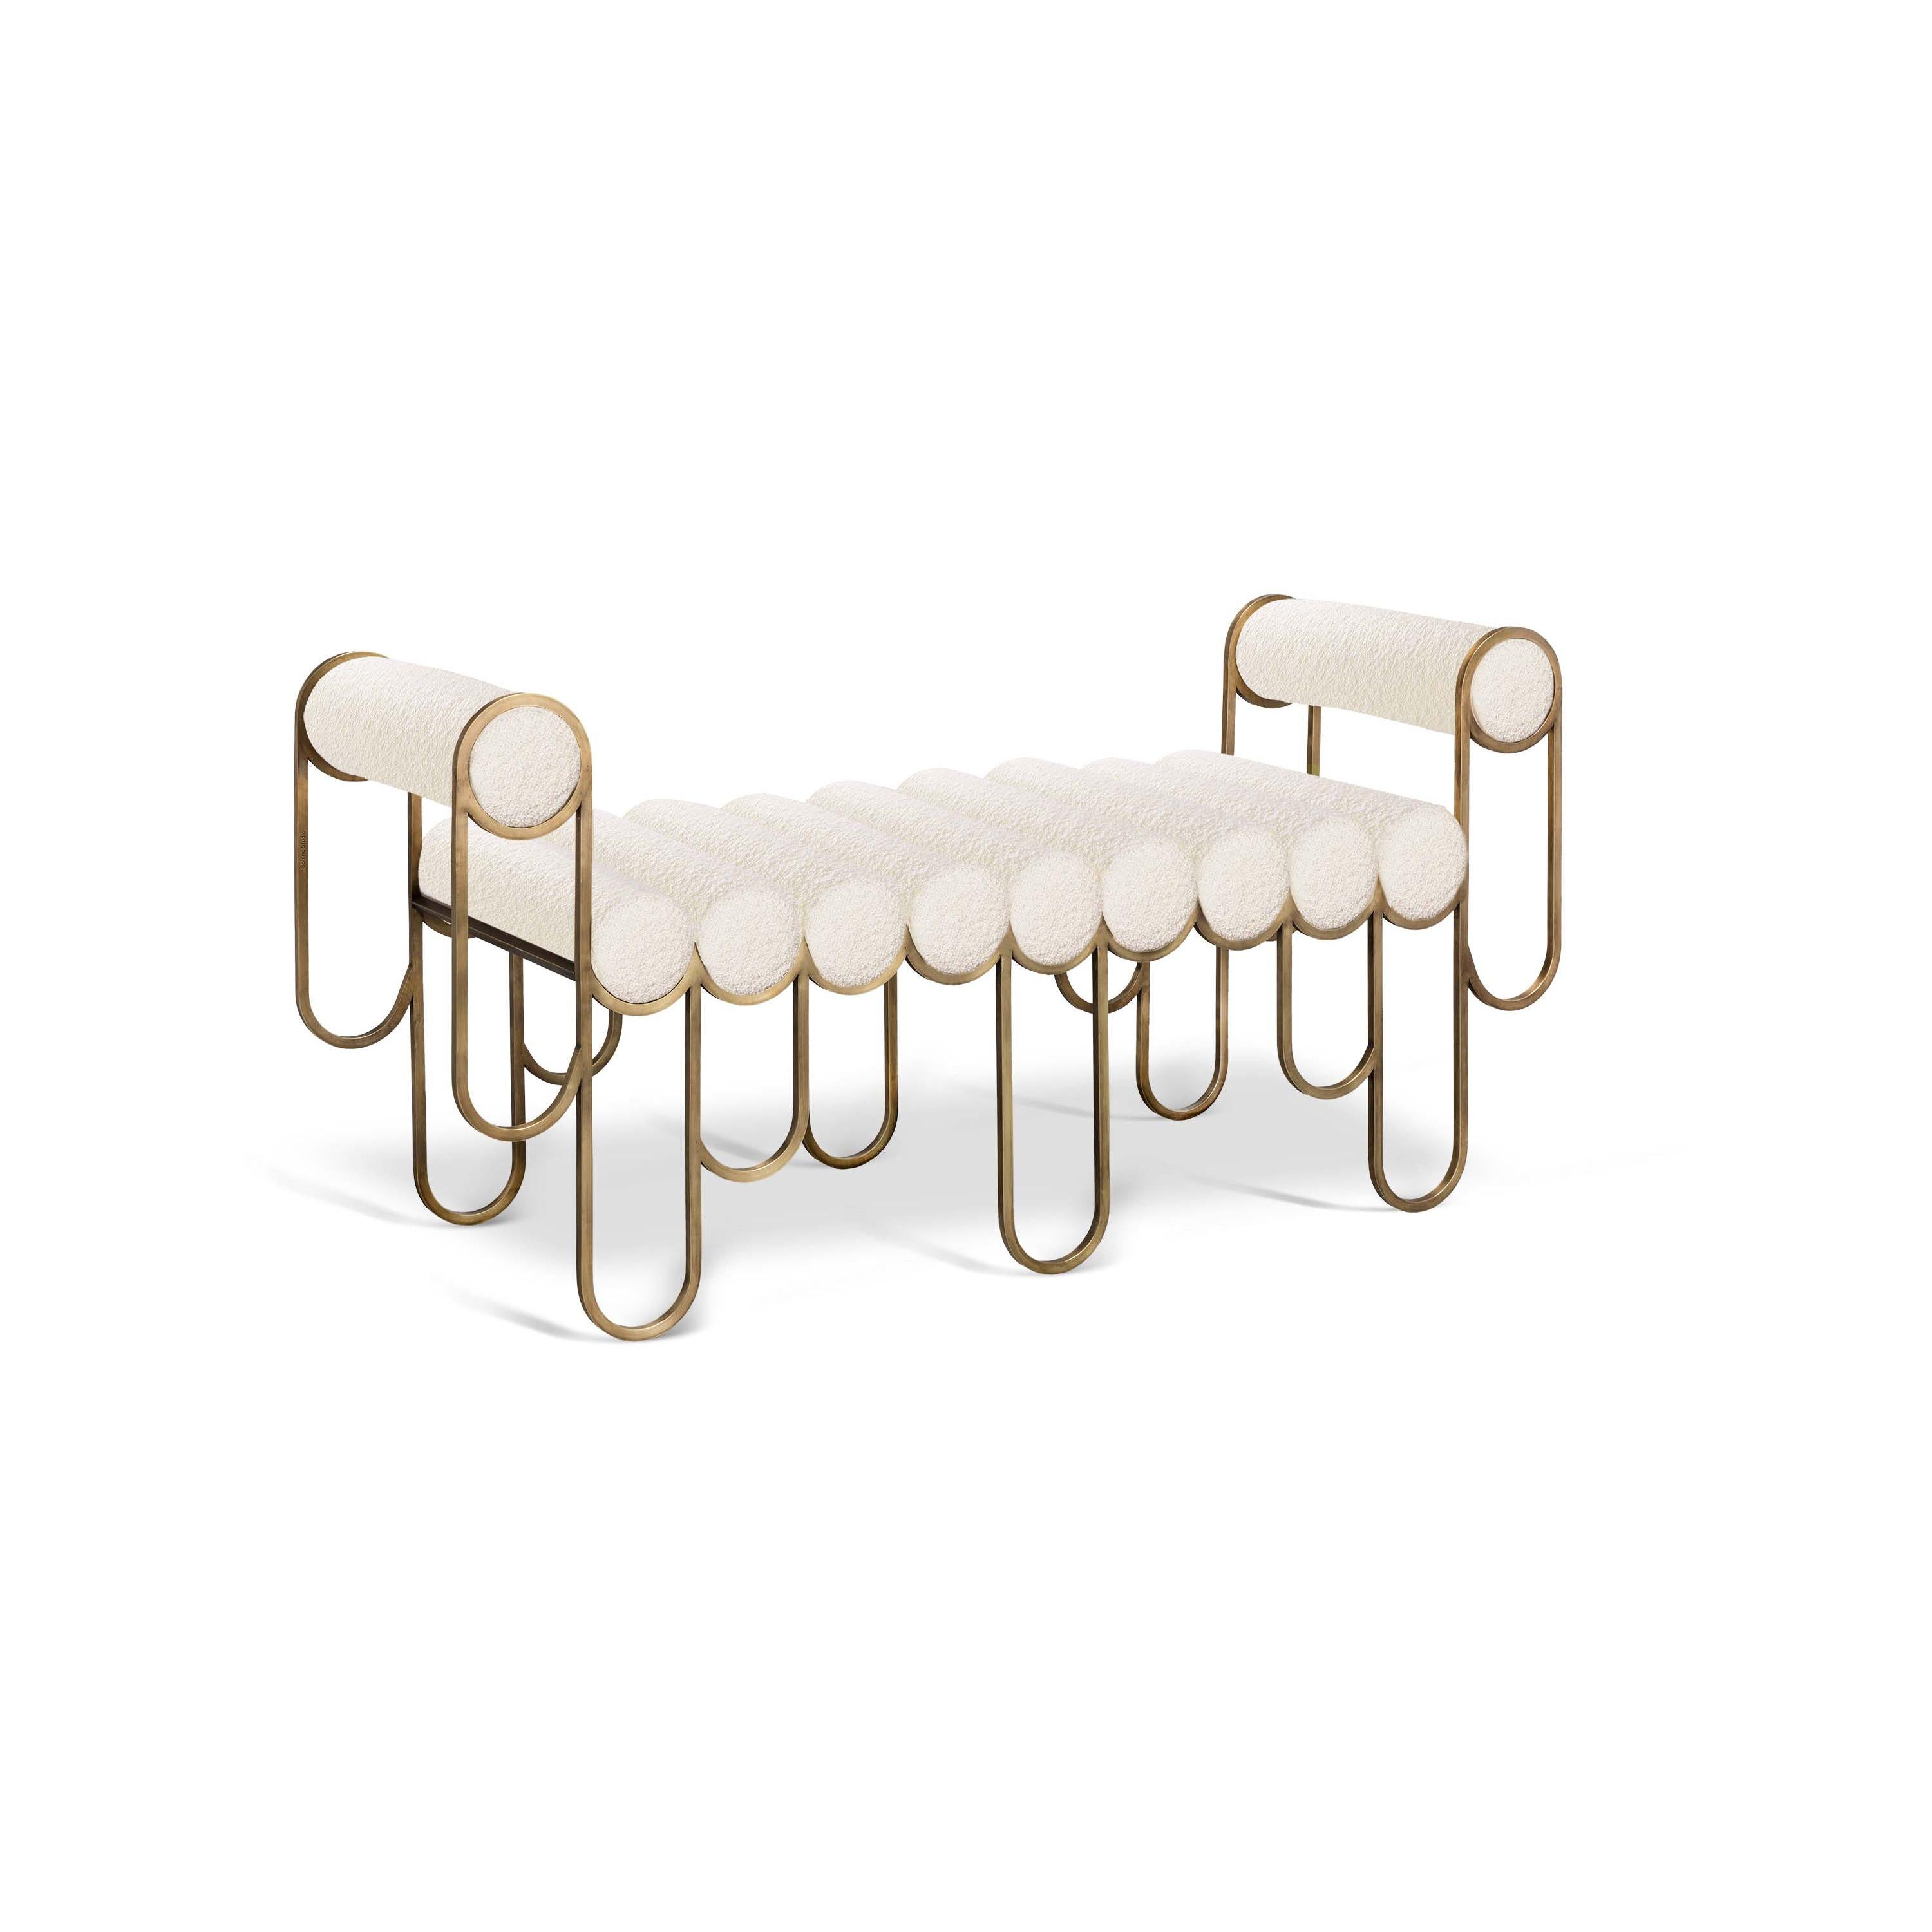 The Apollo loveseat comprises of a series of playfully fine, elongated metal loops, which embrace the upholstered cushion rolls together to form its long, wavy floating seat. The two armrests are held by further configurations of fine looping